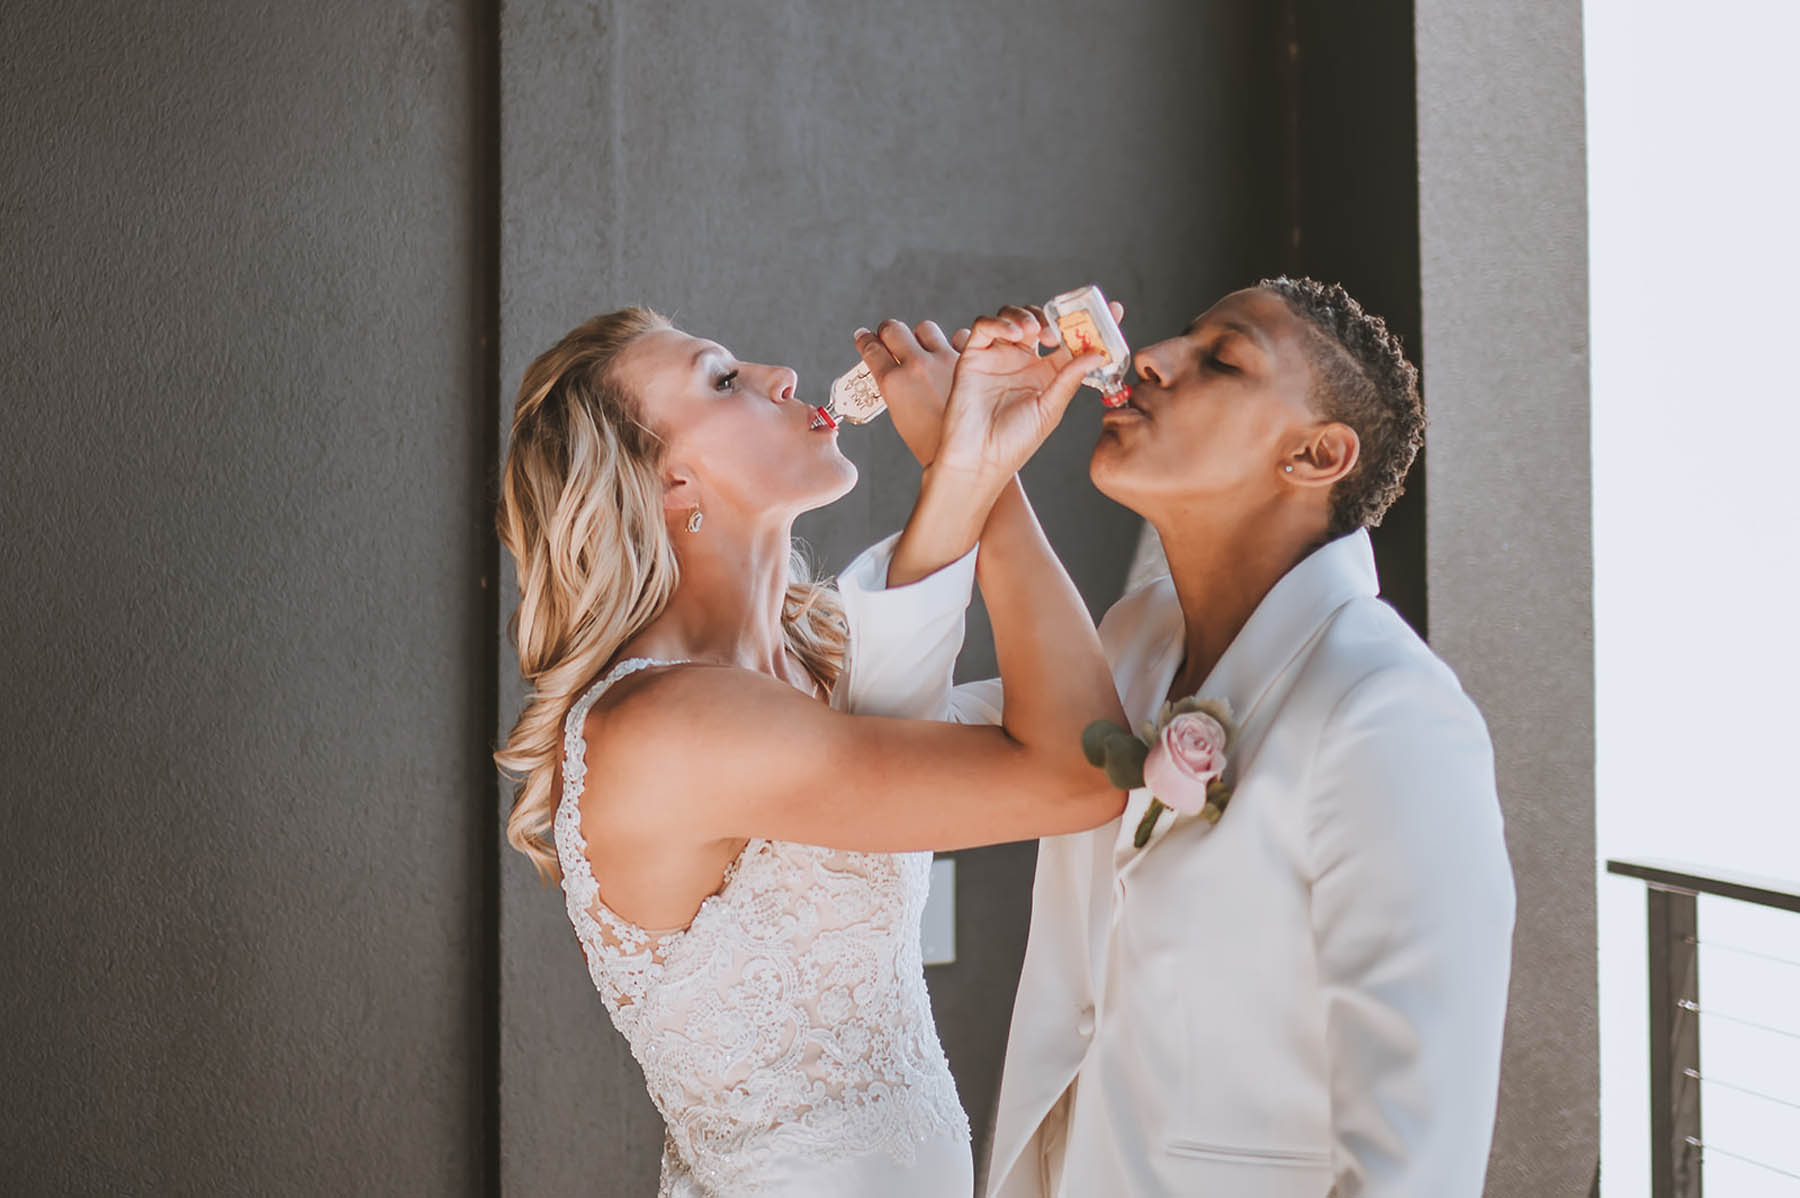 The marriers, dressed in all white, intertwine their arms as they take shots of Fireball.